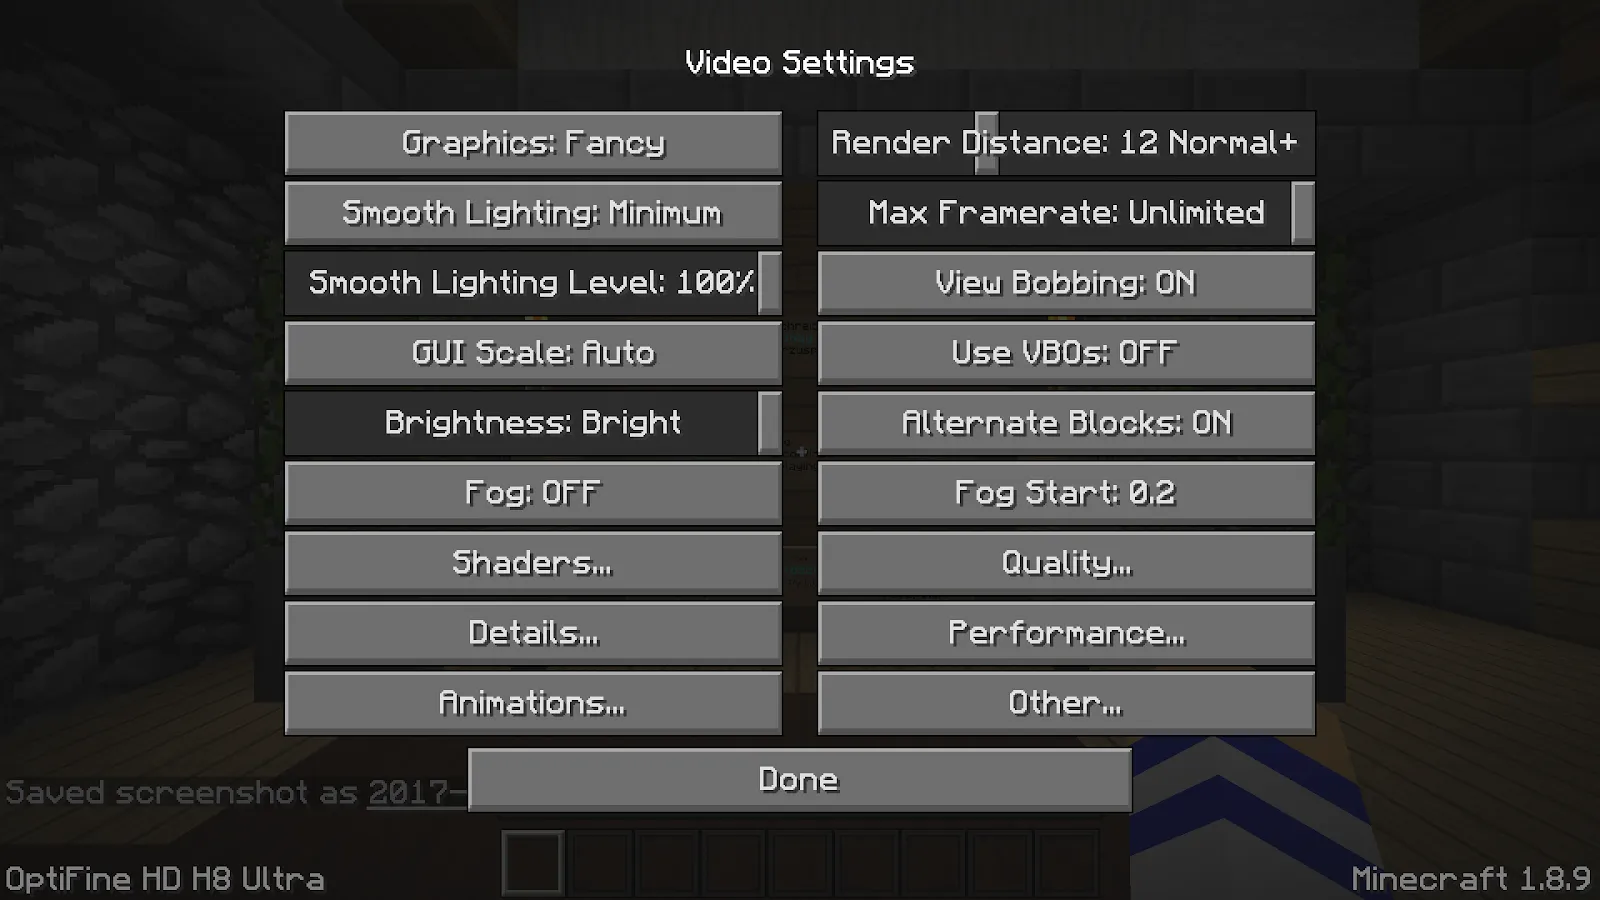 Image showing video settings screen